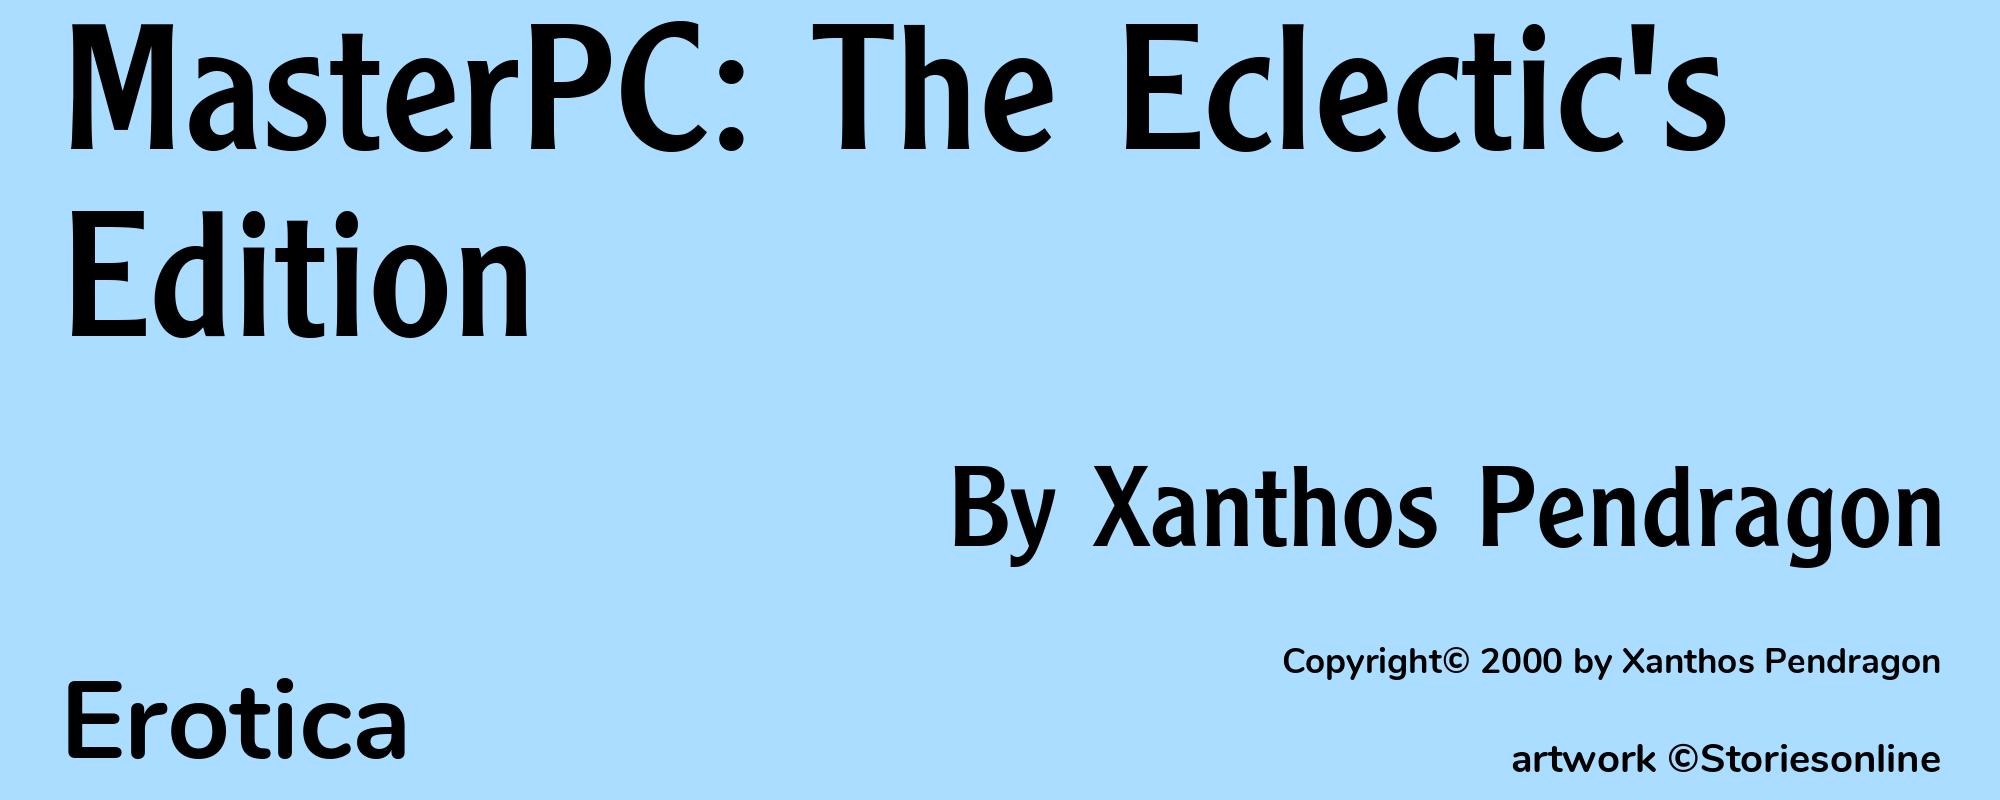 MasterPC: The Eclectic's Edition - Cover